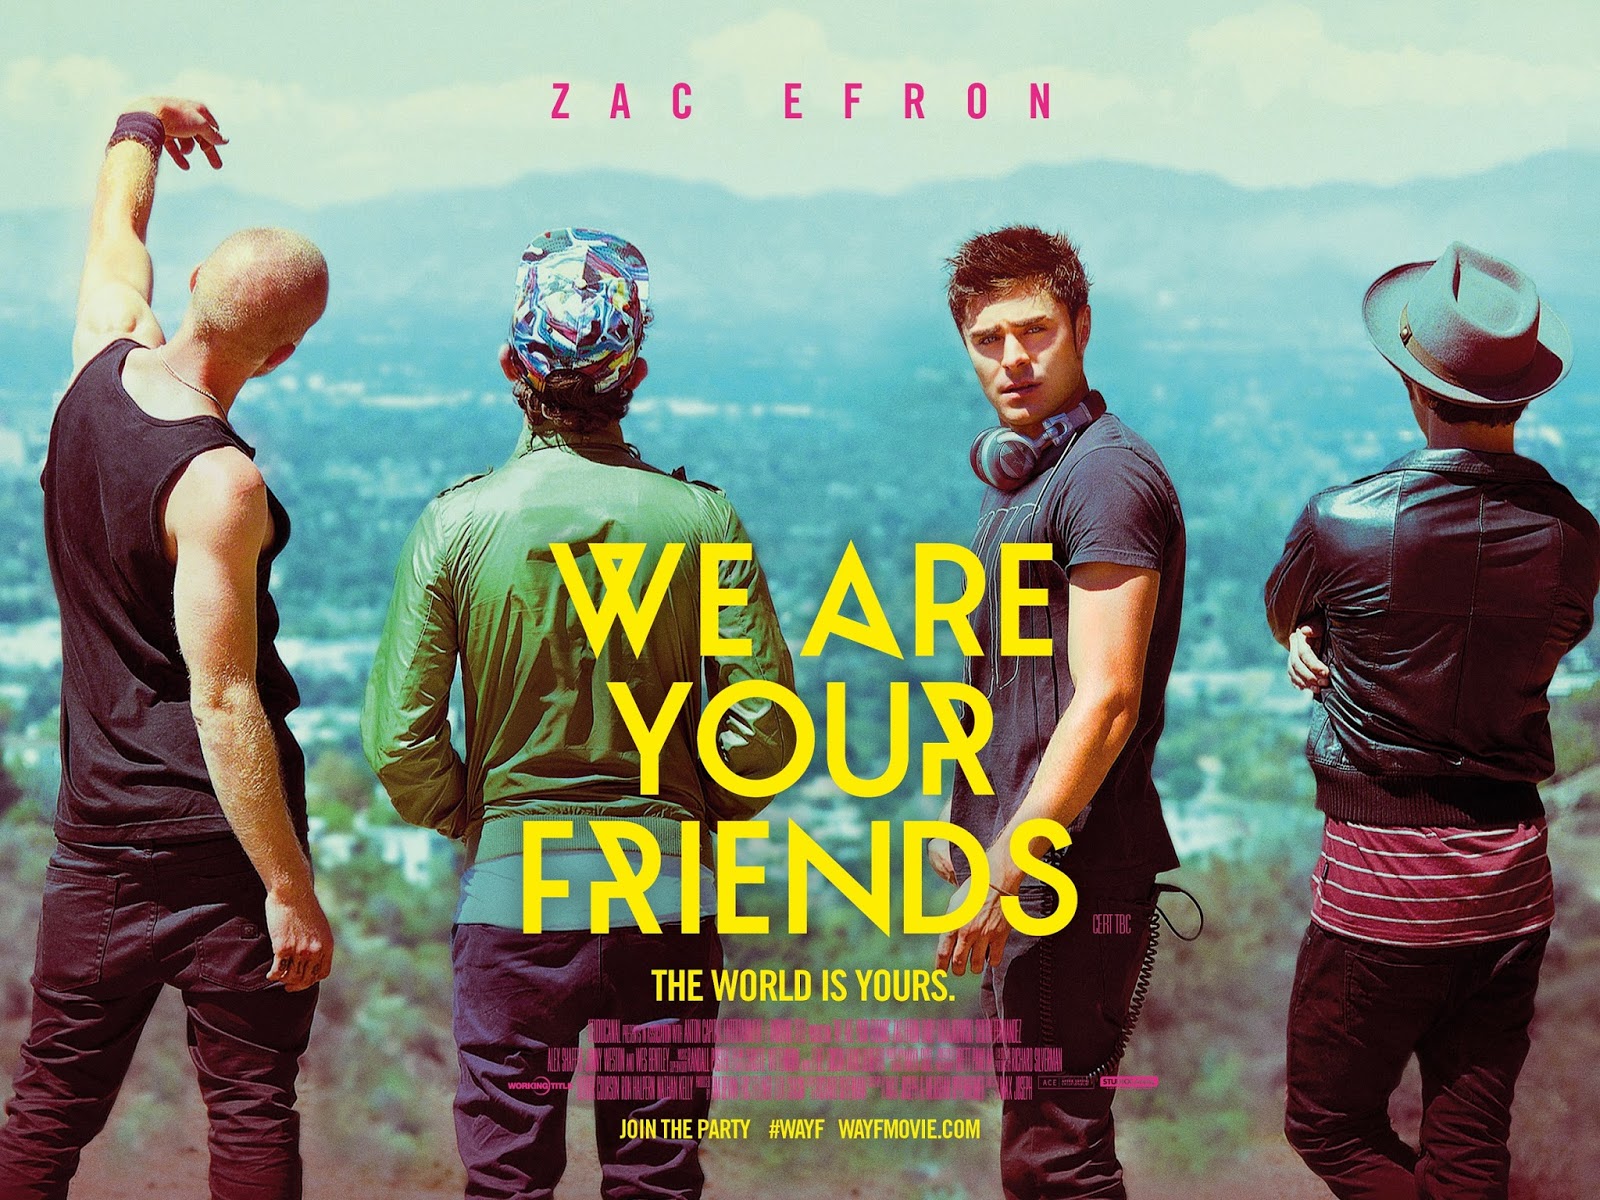 We Are Your Friends Starring Zac Efron Now Showing In Cinemas